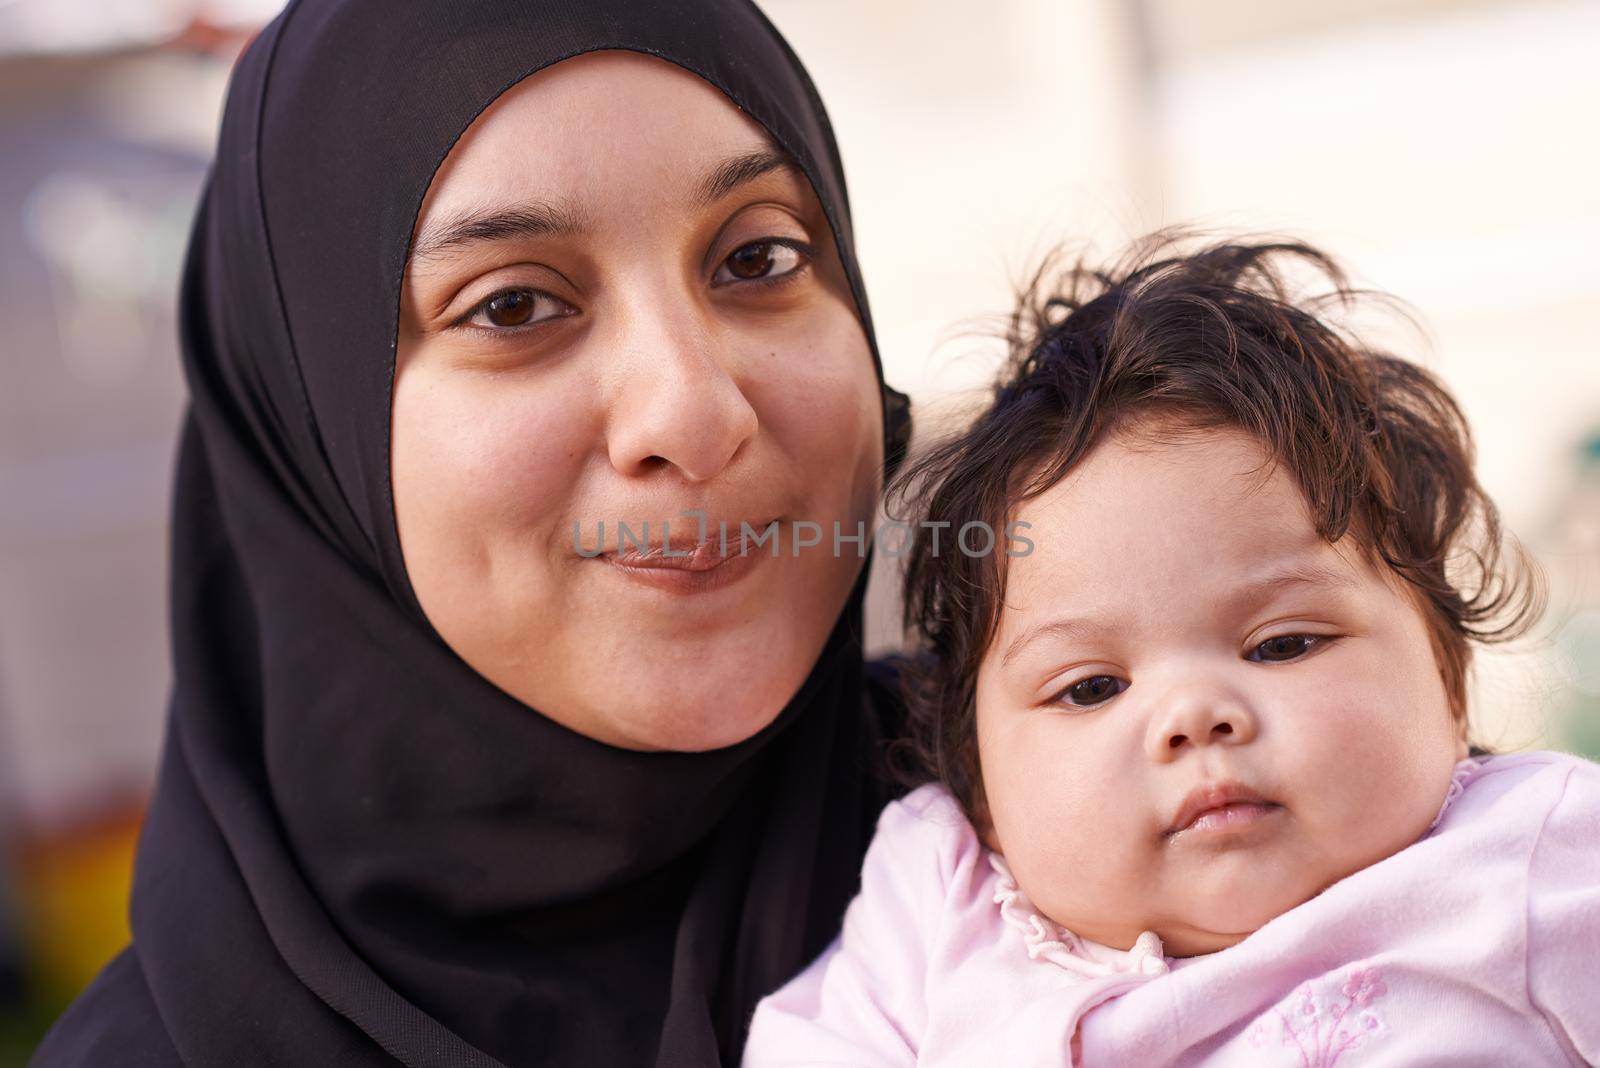 She takes after her dad. a muslim mother and her little baby girl